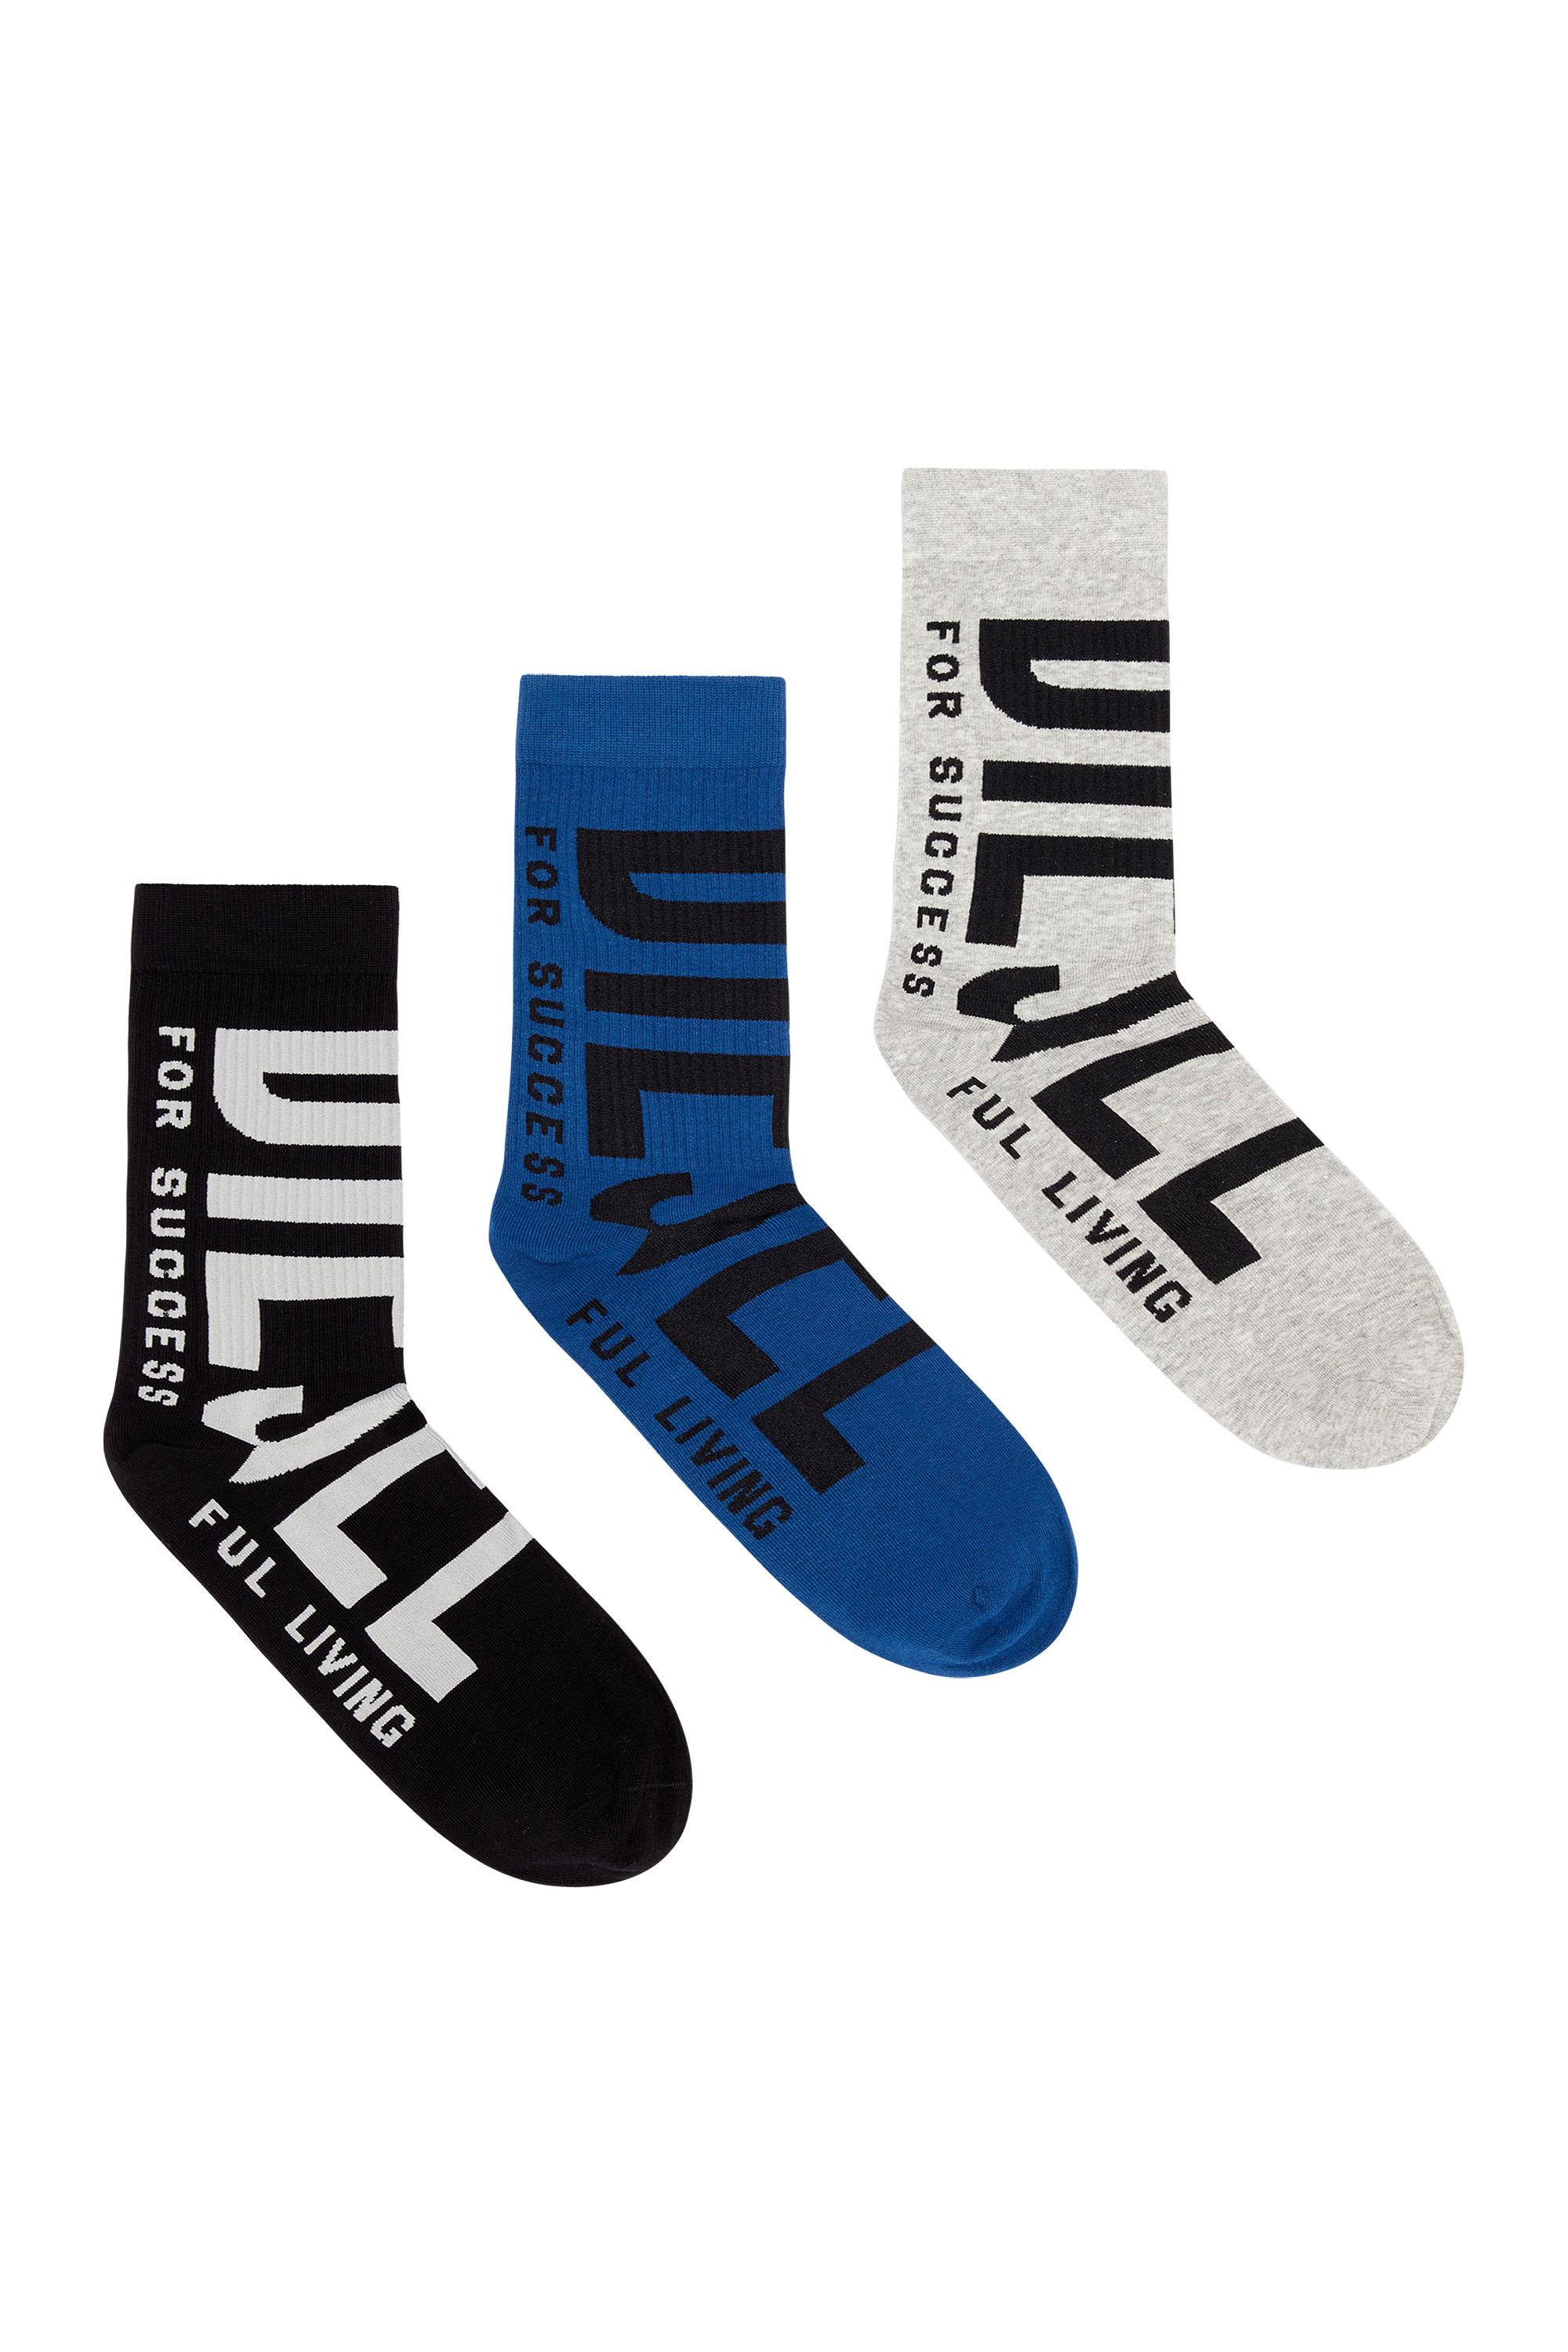 Three-pack of socks with maxi Diesel logo